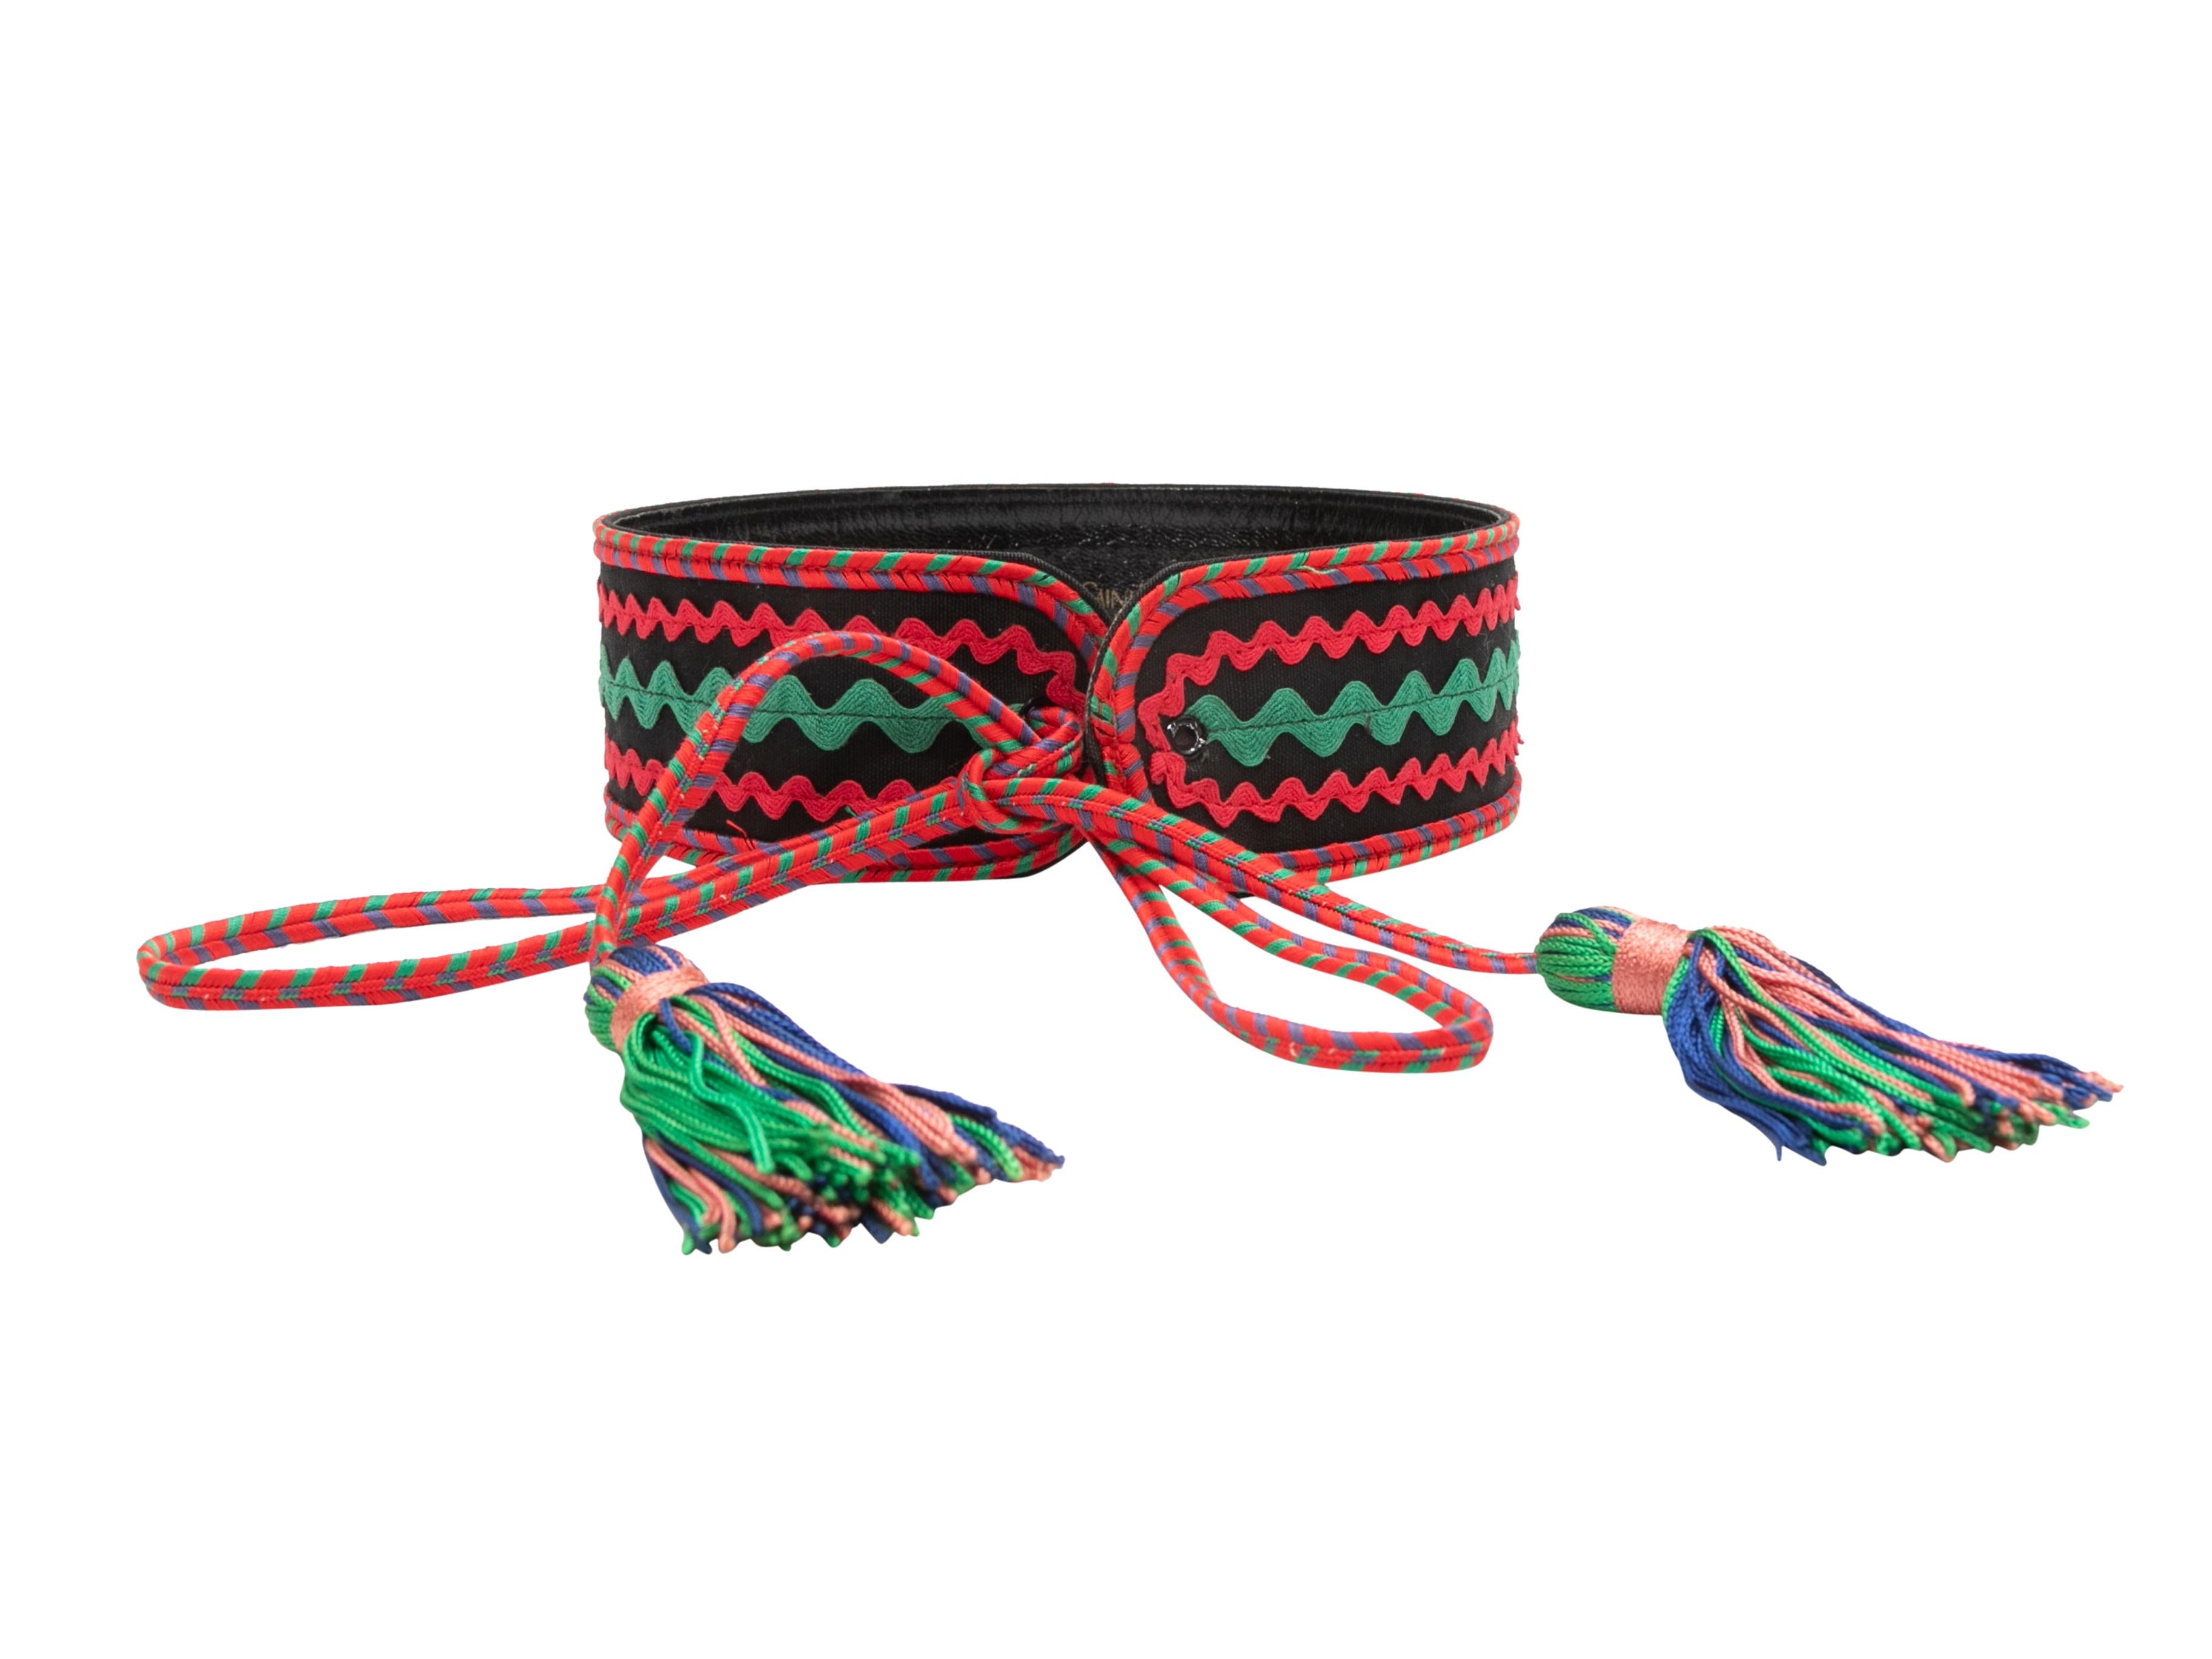 Vintage black and multicolor ric-rac tassel-trimmed belt by Yves Saint Laurent. From the 1976 Russian Collection. 2.5